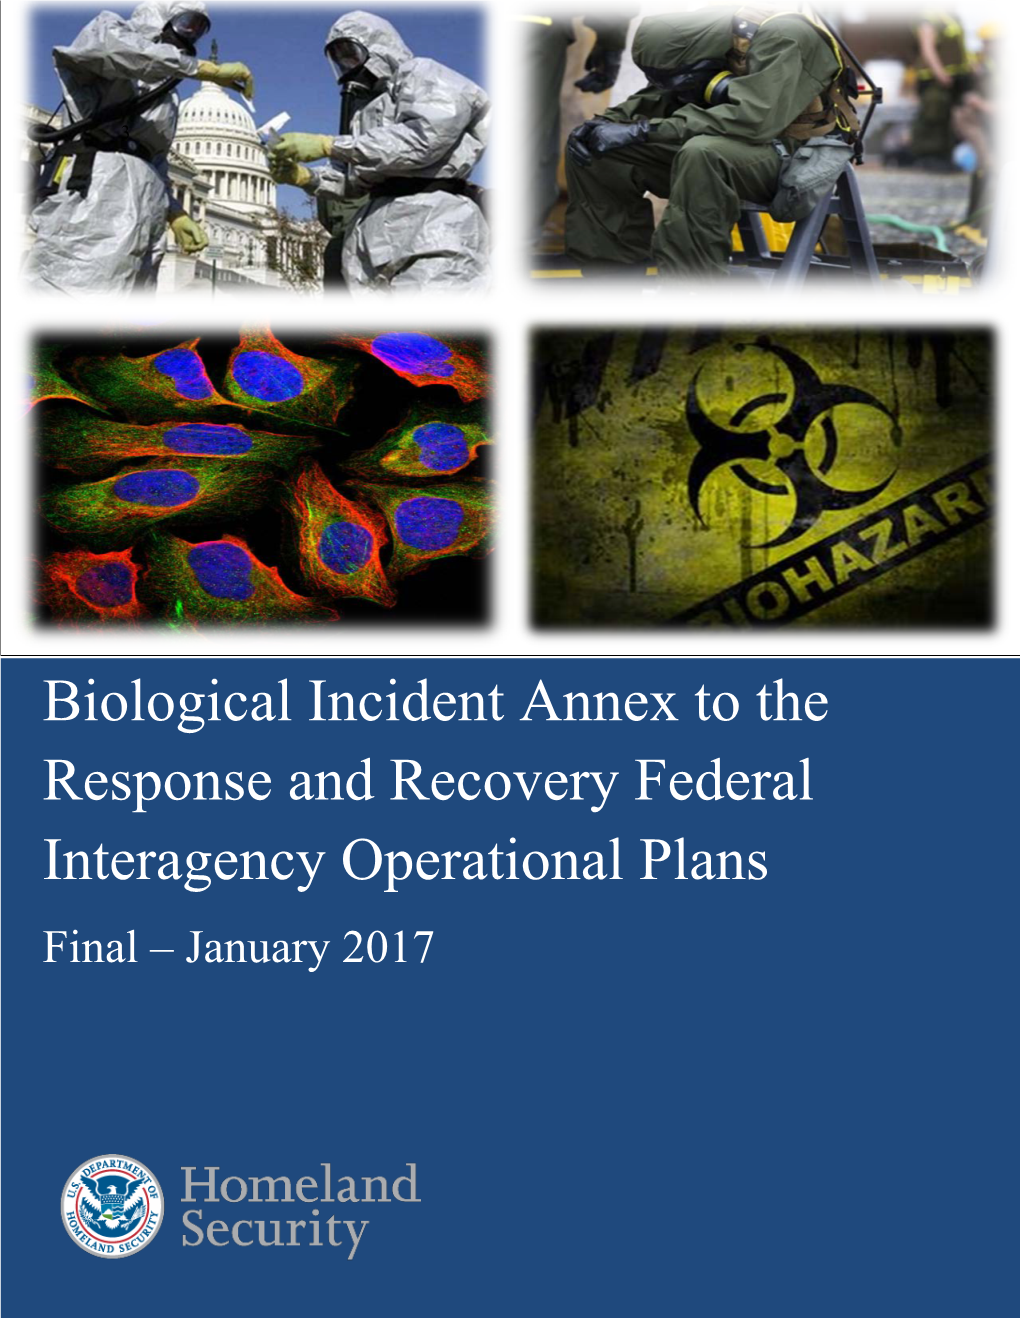 Biological Incident Annex to the Response and Recovery Federal Interagency Operational Plans